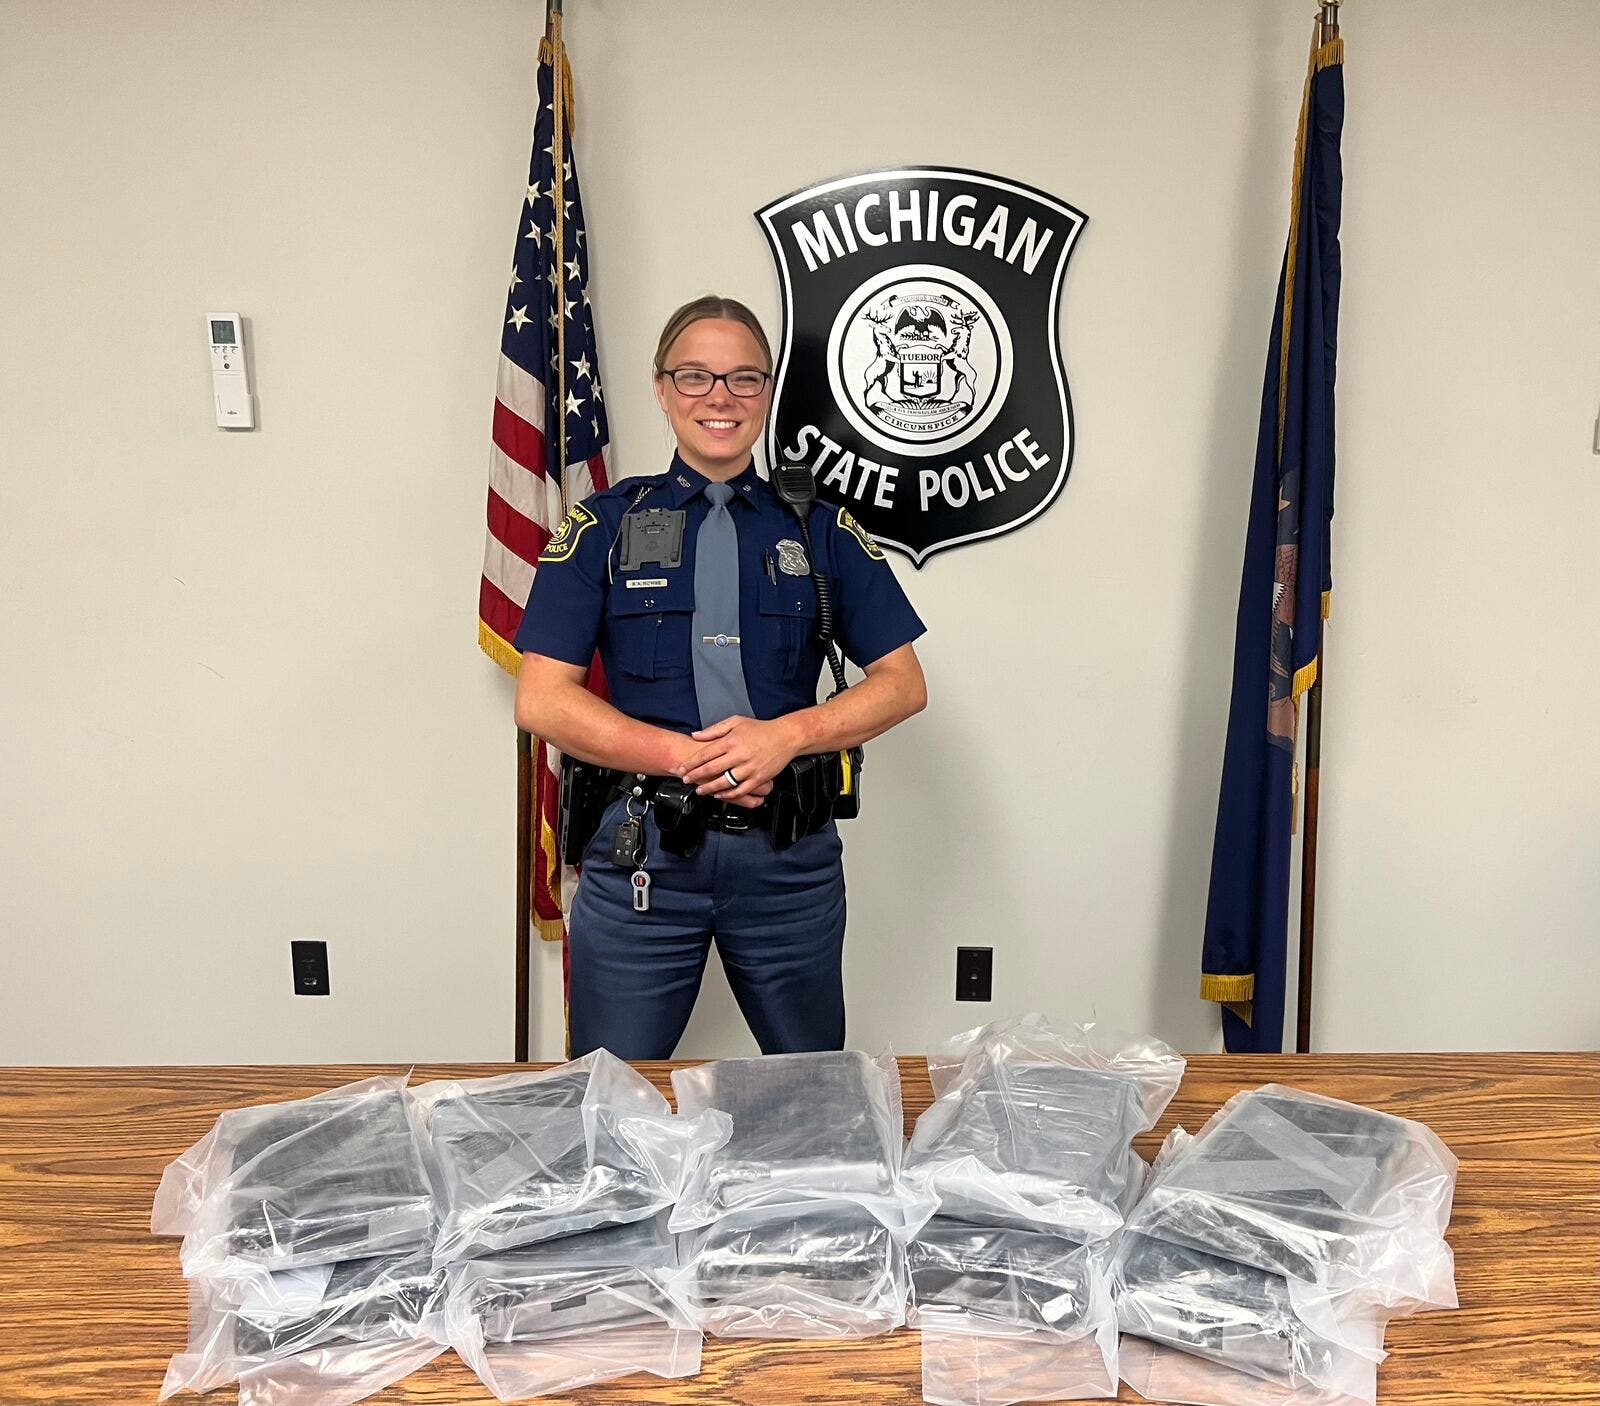 Michigan police seize nearly $1 million worth of cocaine, 3 suspects arrested